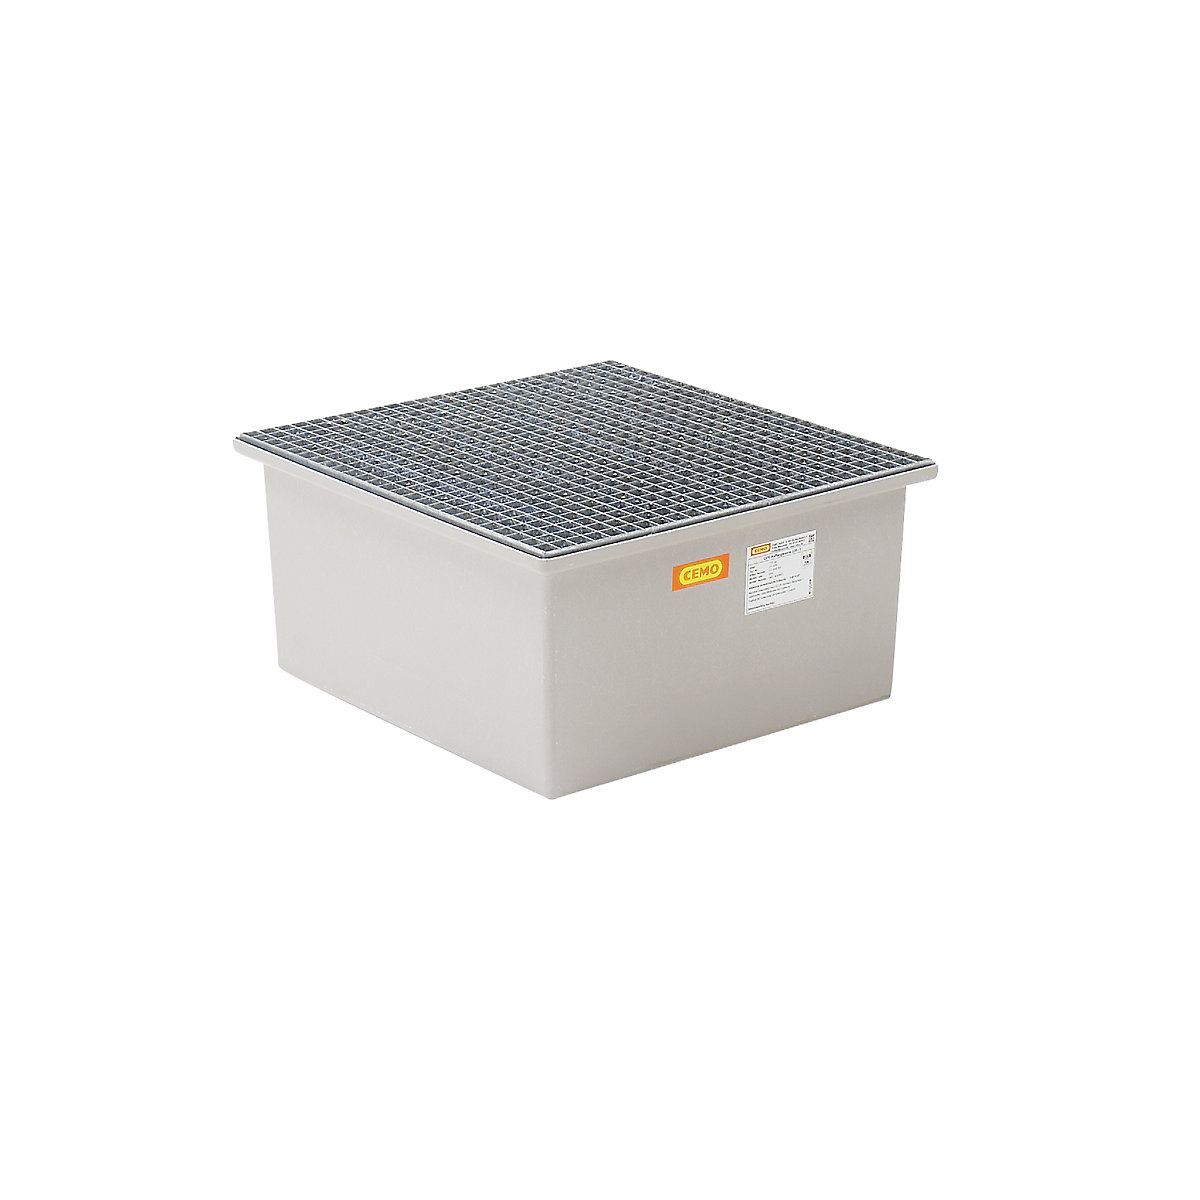 GRP base sump tray – CEMO, 1 x 200 litre drum, with certification, with steel grate-4